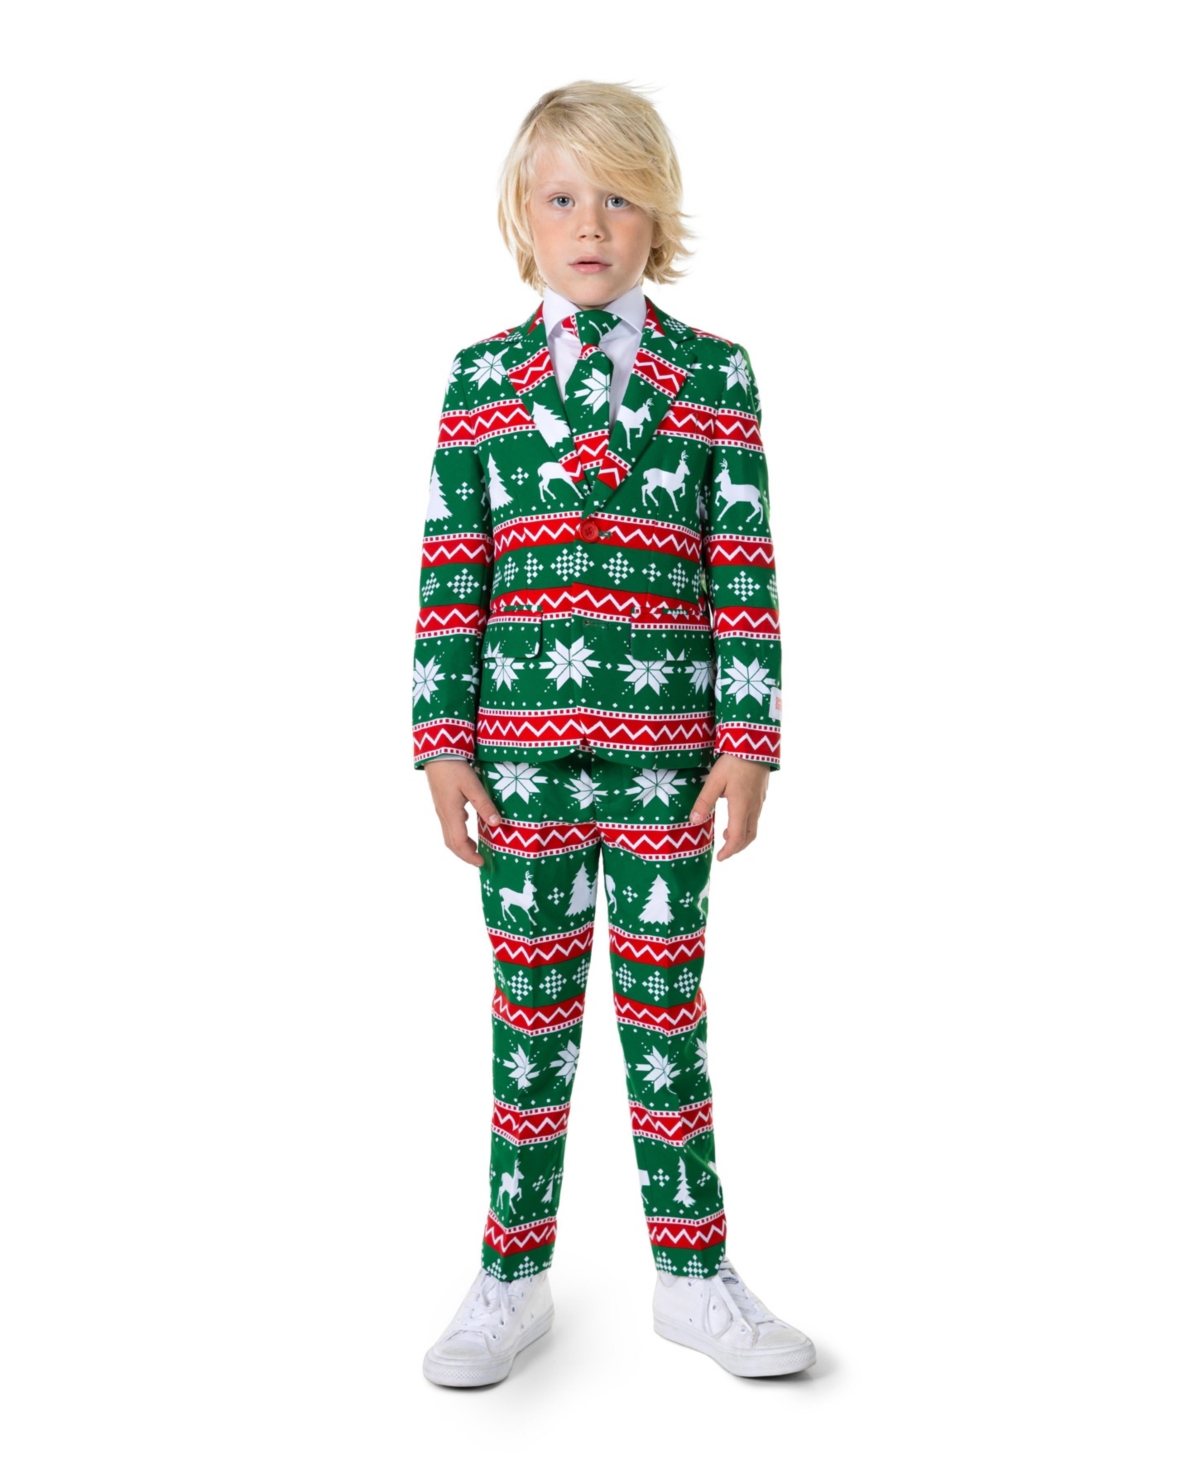 Opposuits Kids' Little Boys Festive Christmas Party Outfit Including Blazer, Pants And Tie Suit Set In Green